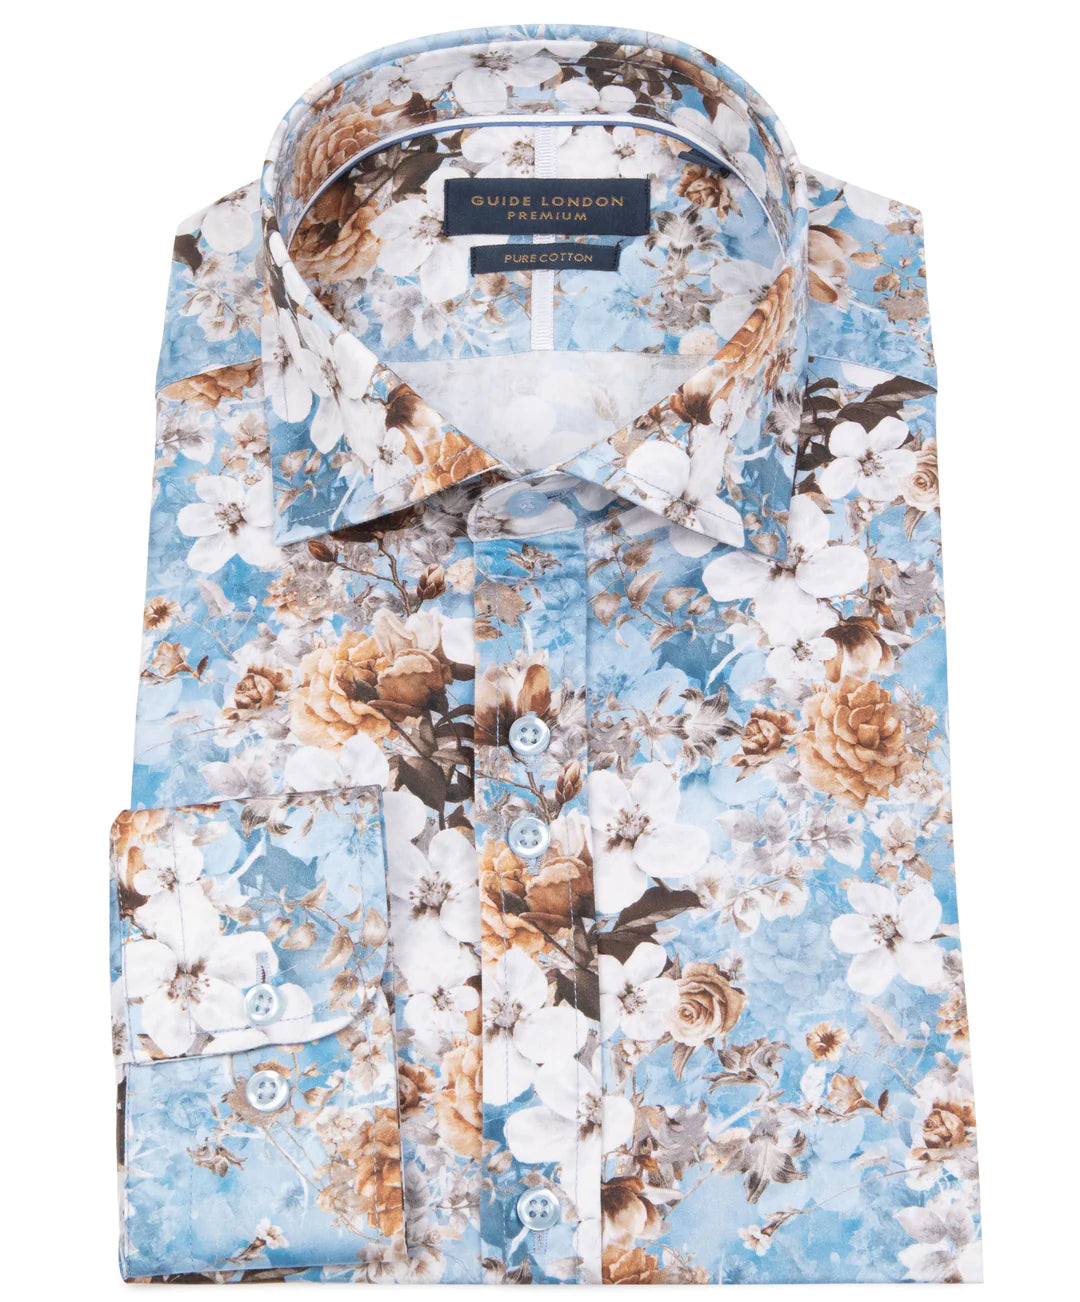 Guide London Shirt in Blue Floral